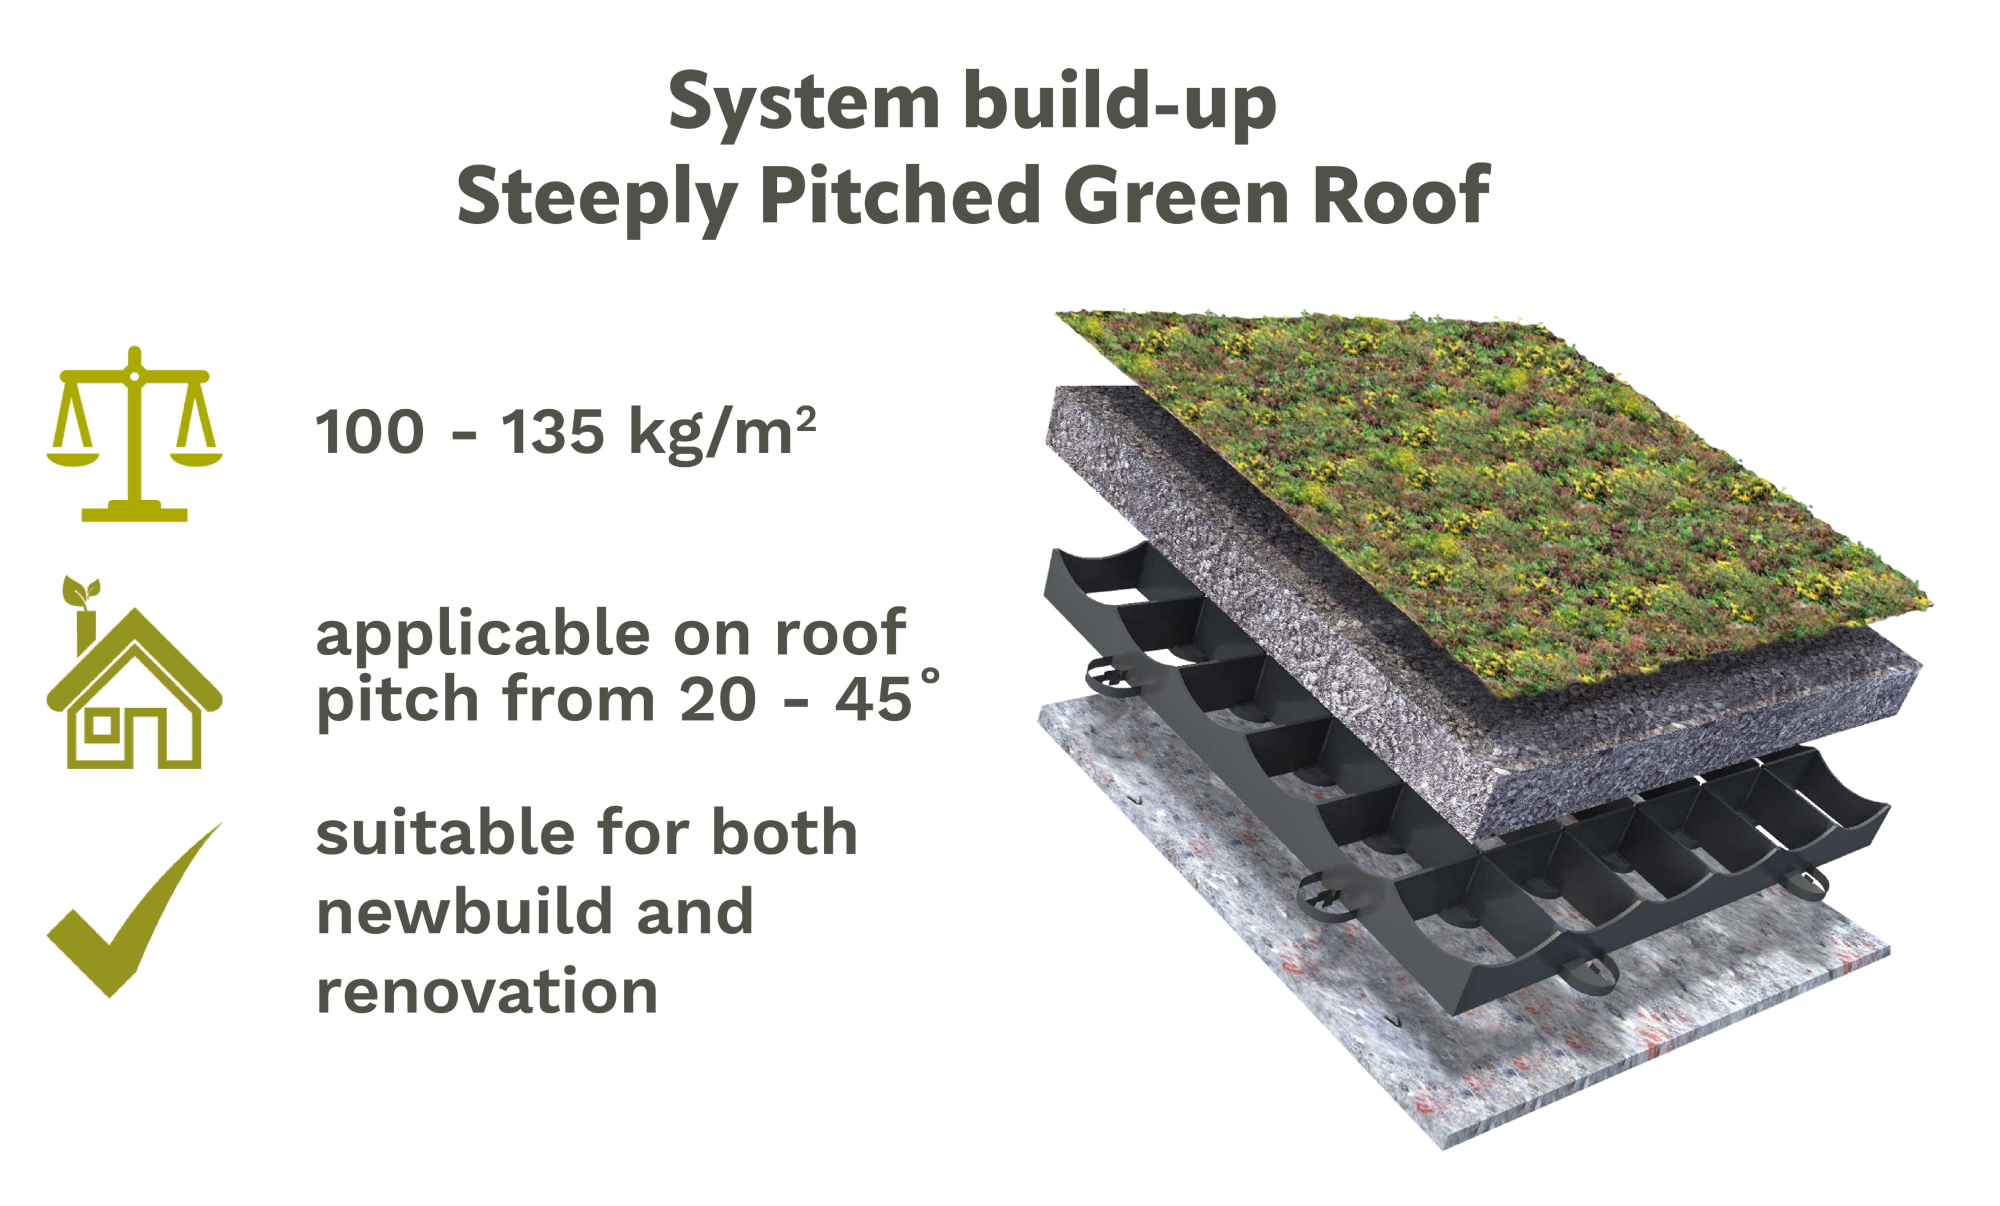 System build-up Steeply Pitched Green Roof system